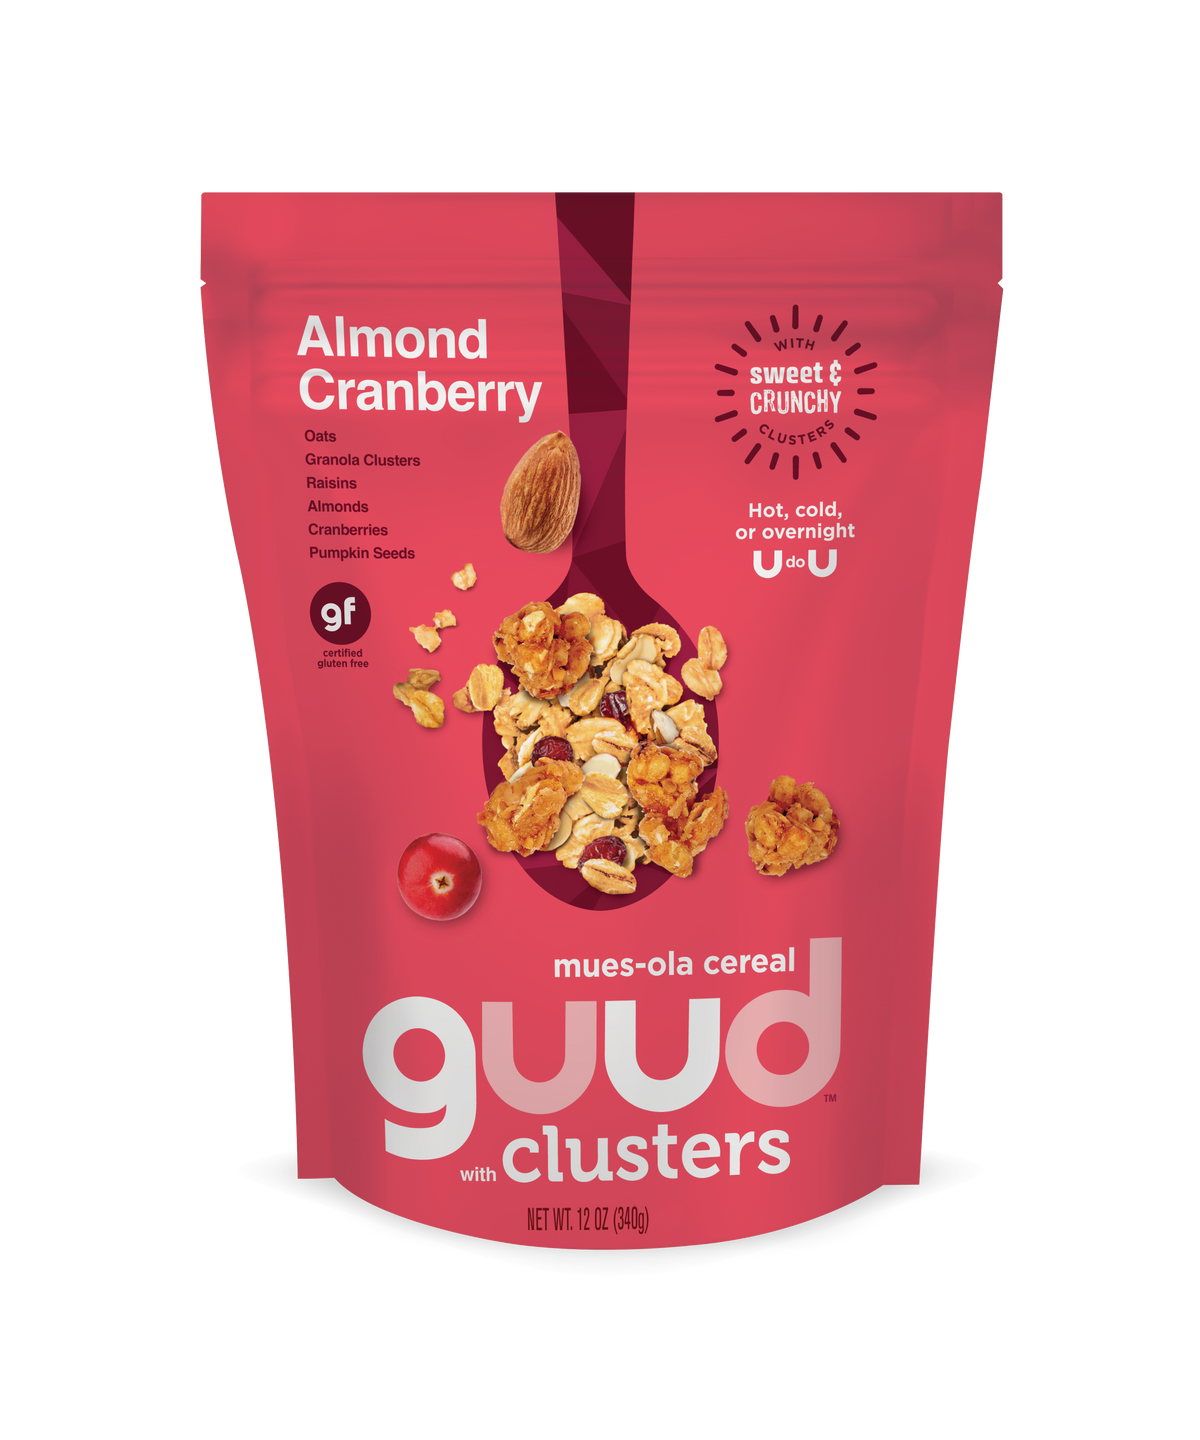 Almond Cranberry Mues-Ola Clusters